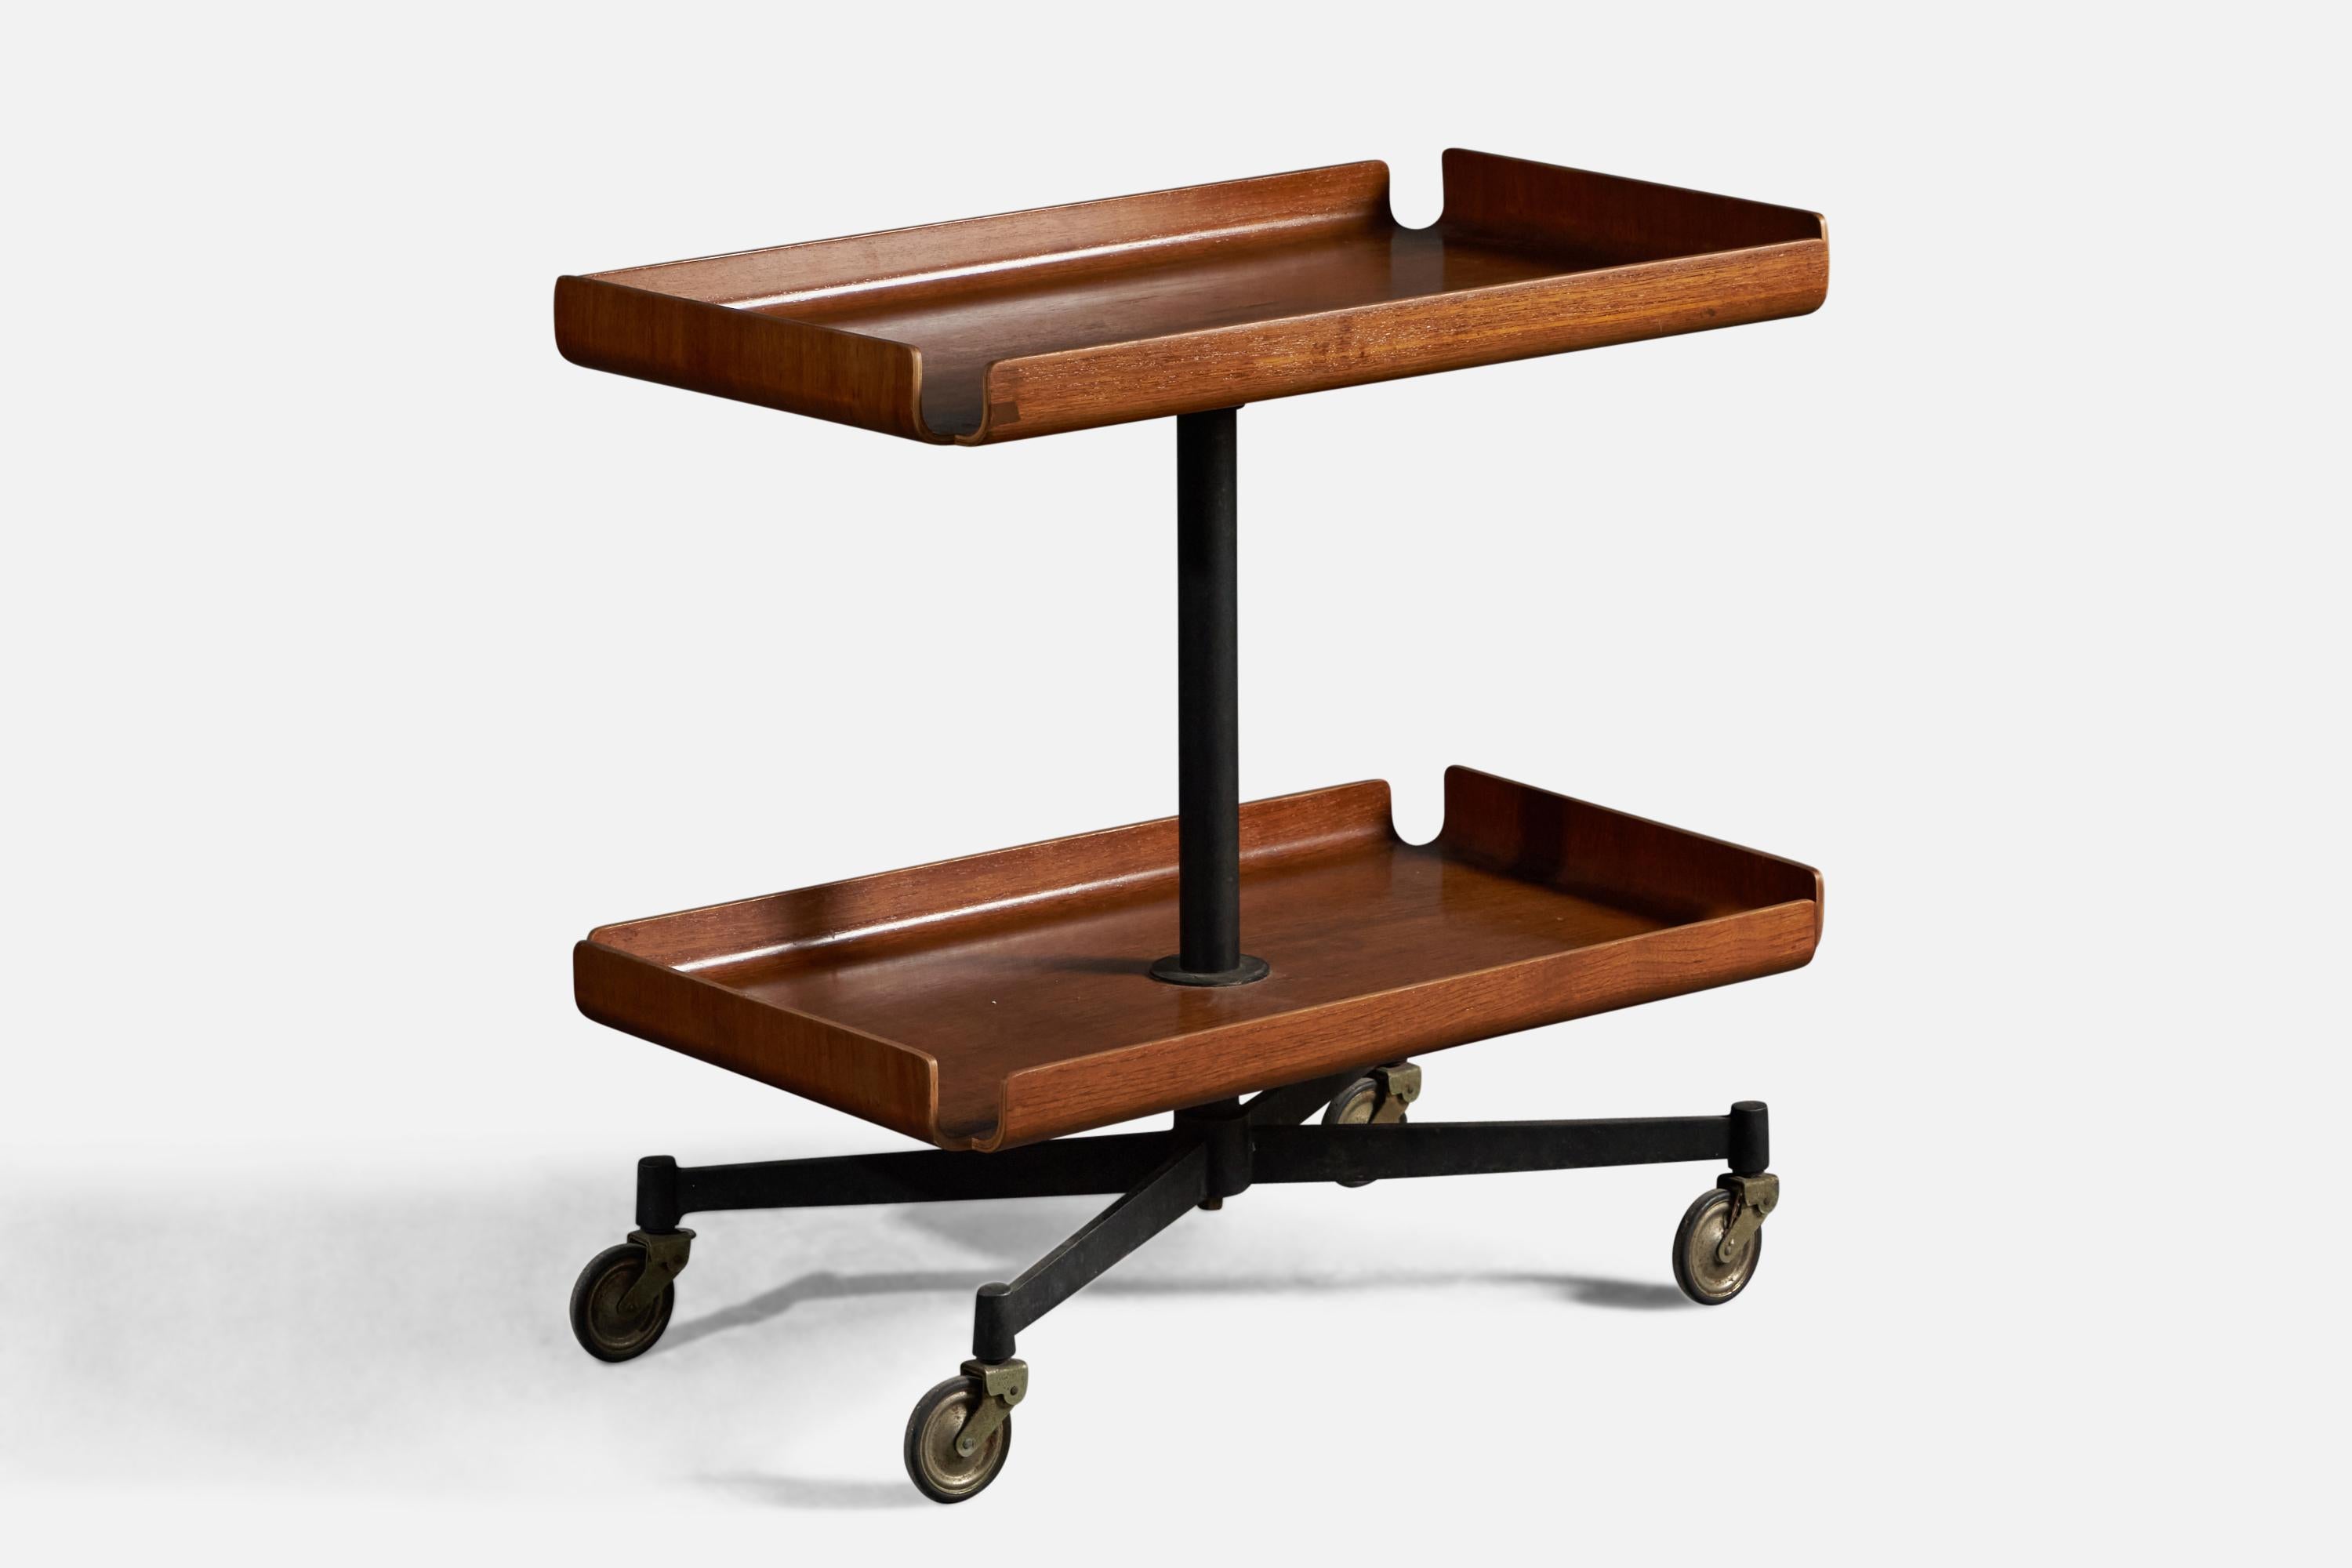 A black-lacquer metal, brass and moulded walnut plywood bar cart, design attributed to Campo & Graffi, presumably manufactured by Home, Italy, c. 1950s.